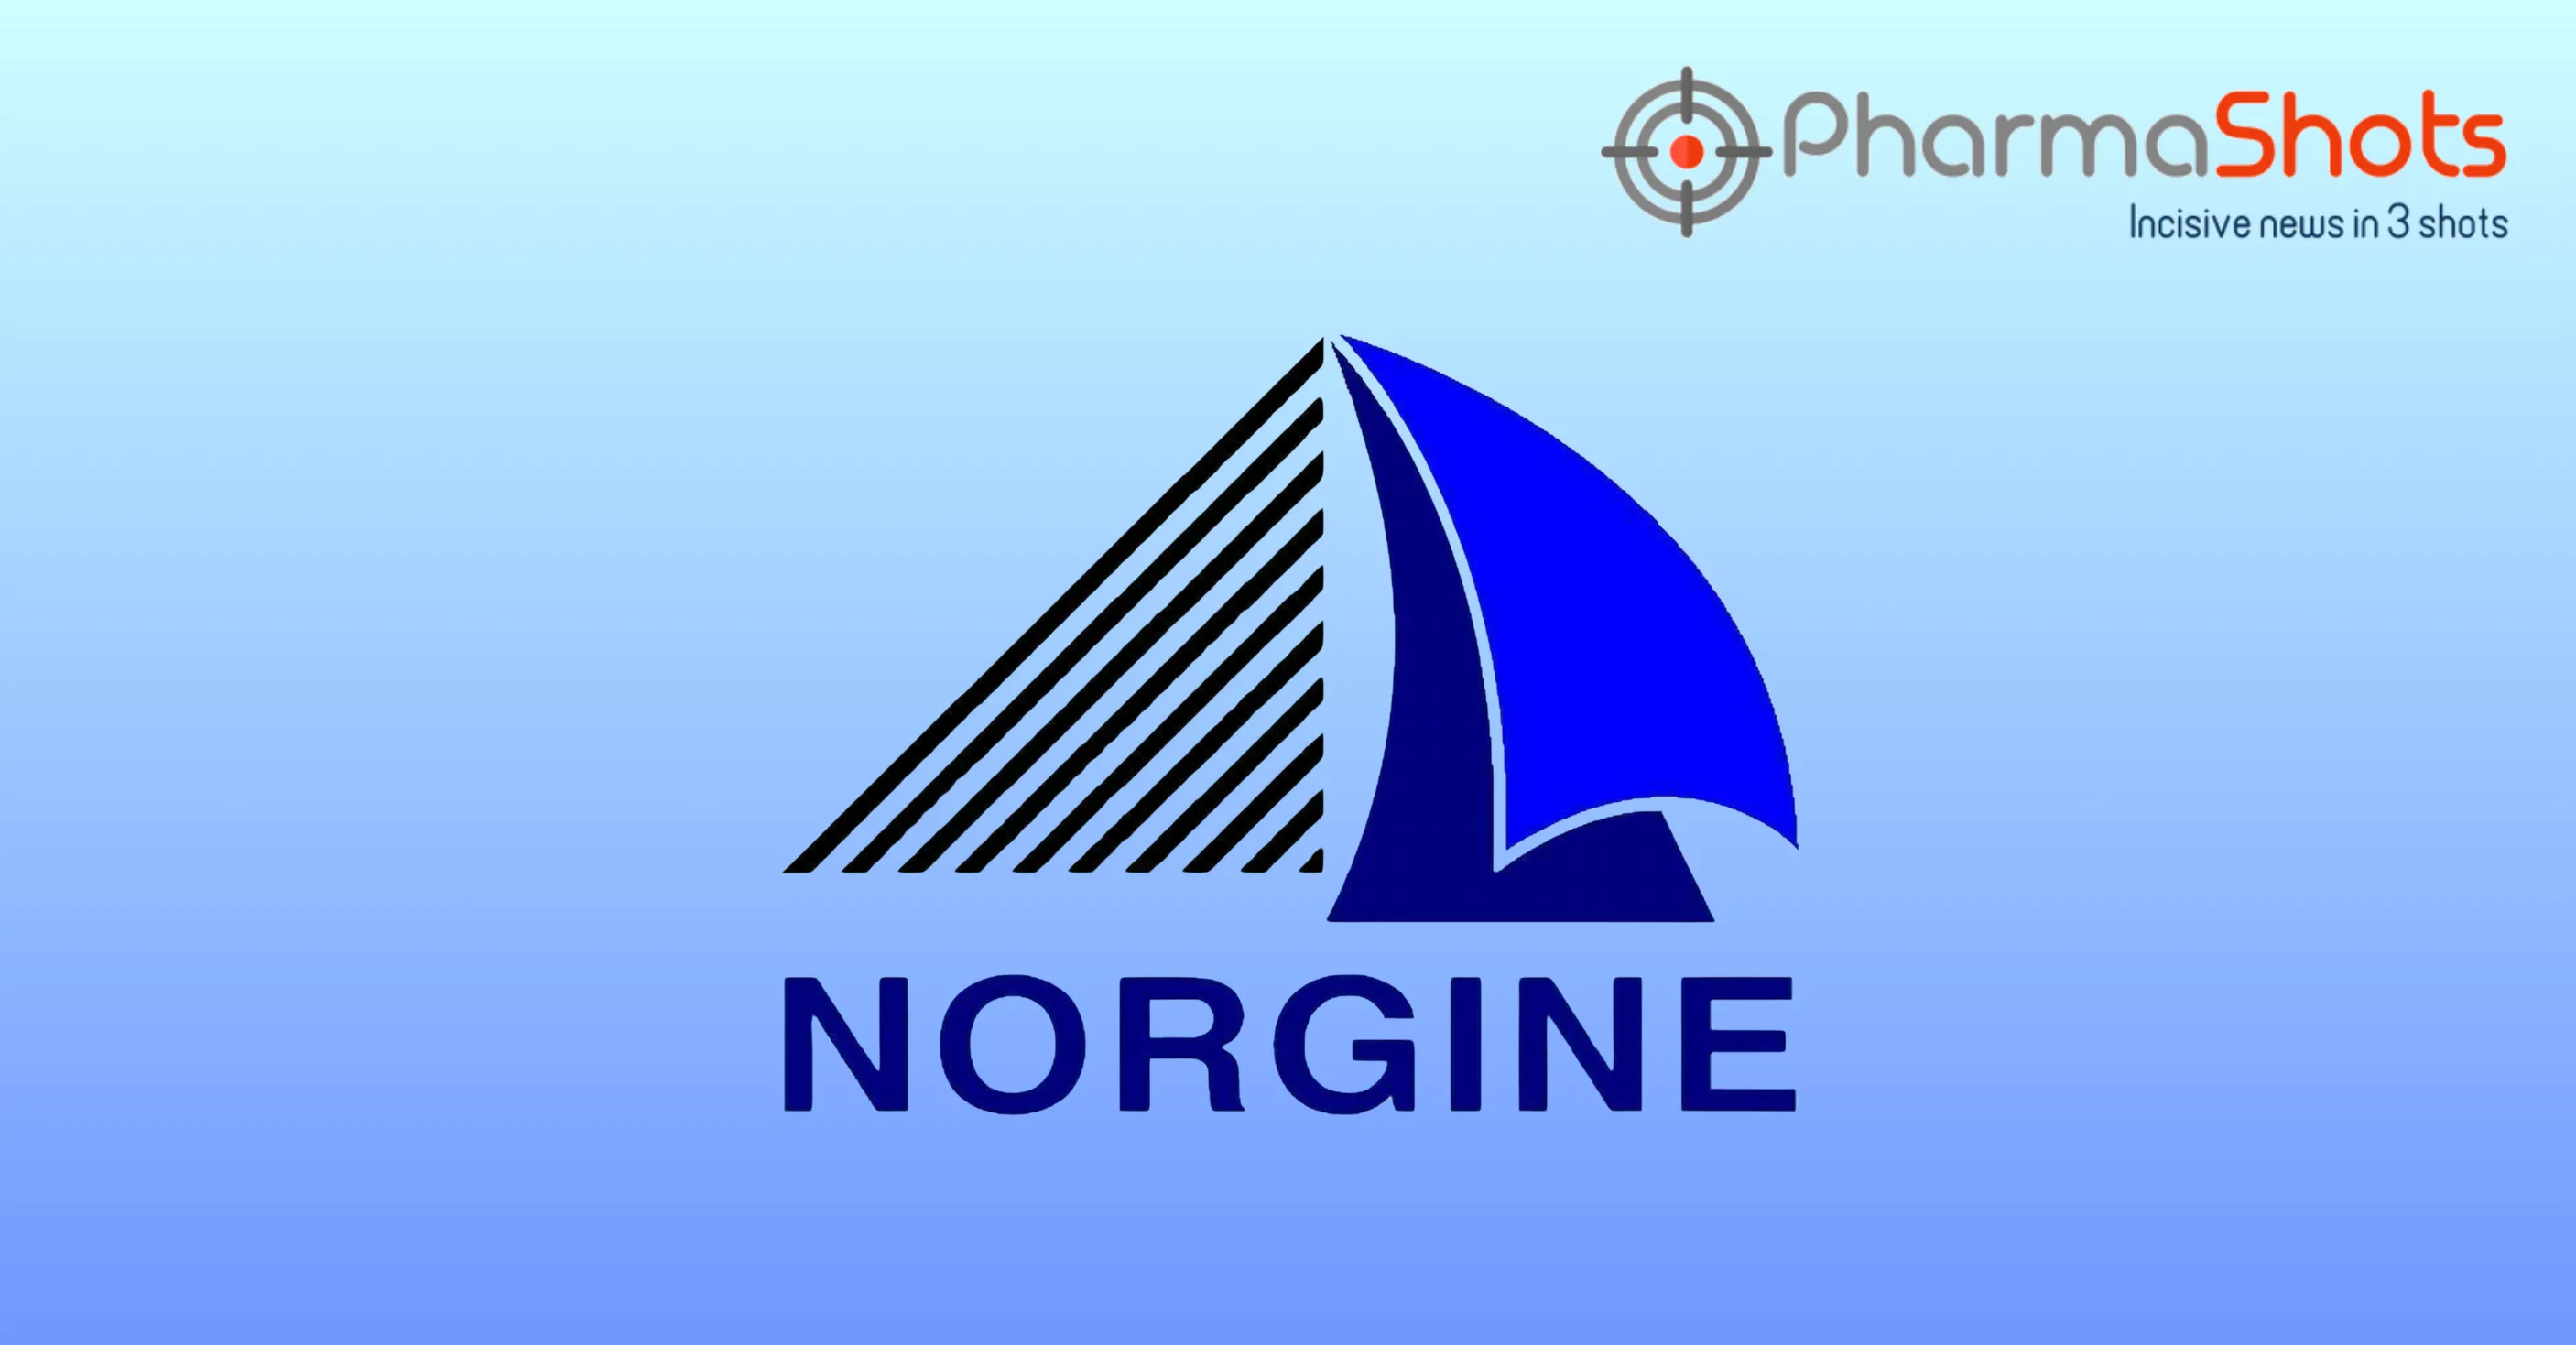 Norgine’s NPJ5008 (Dantrolene sodium hemiheptahydrate) Receives CHMP’s Positive Opinion for the Treatment of Malignant Hyperthermia